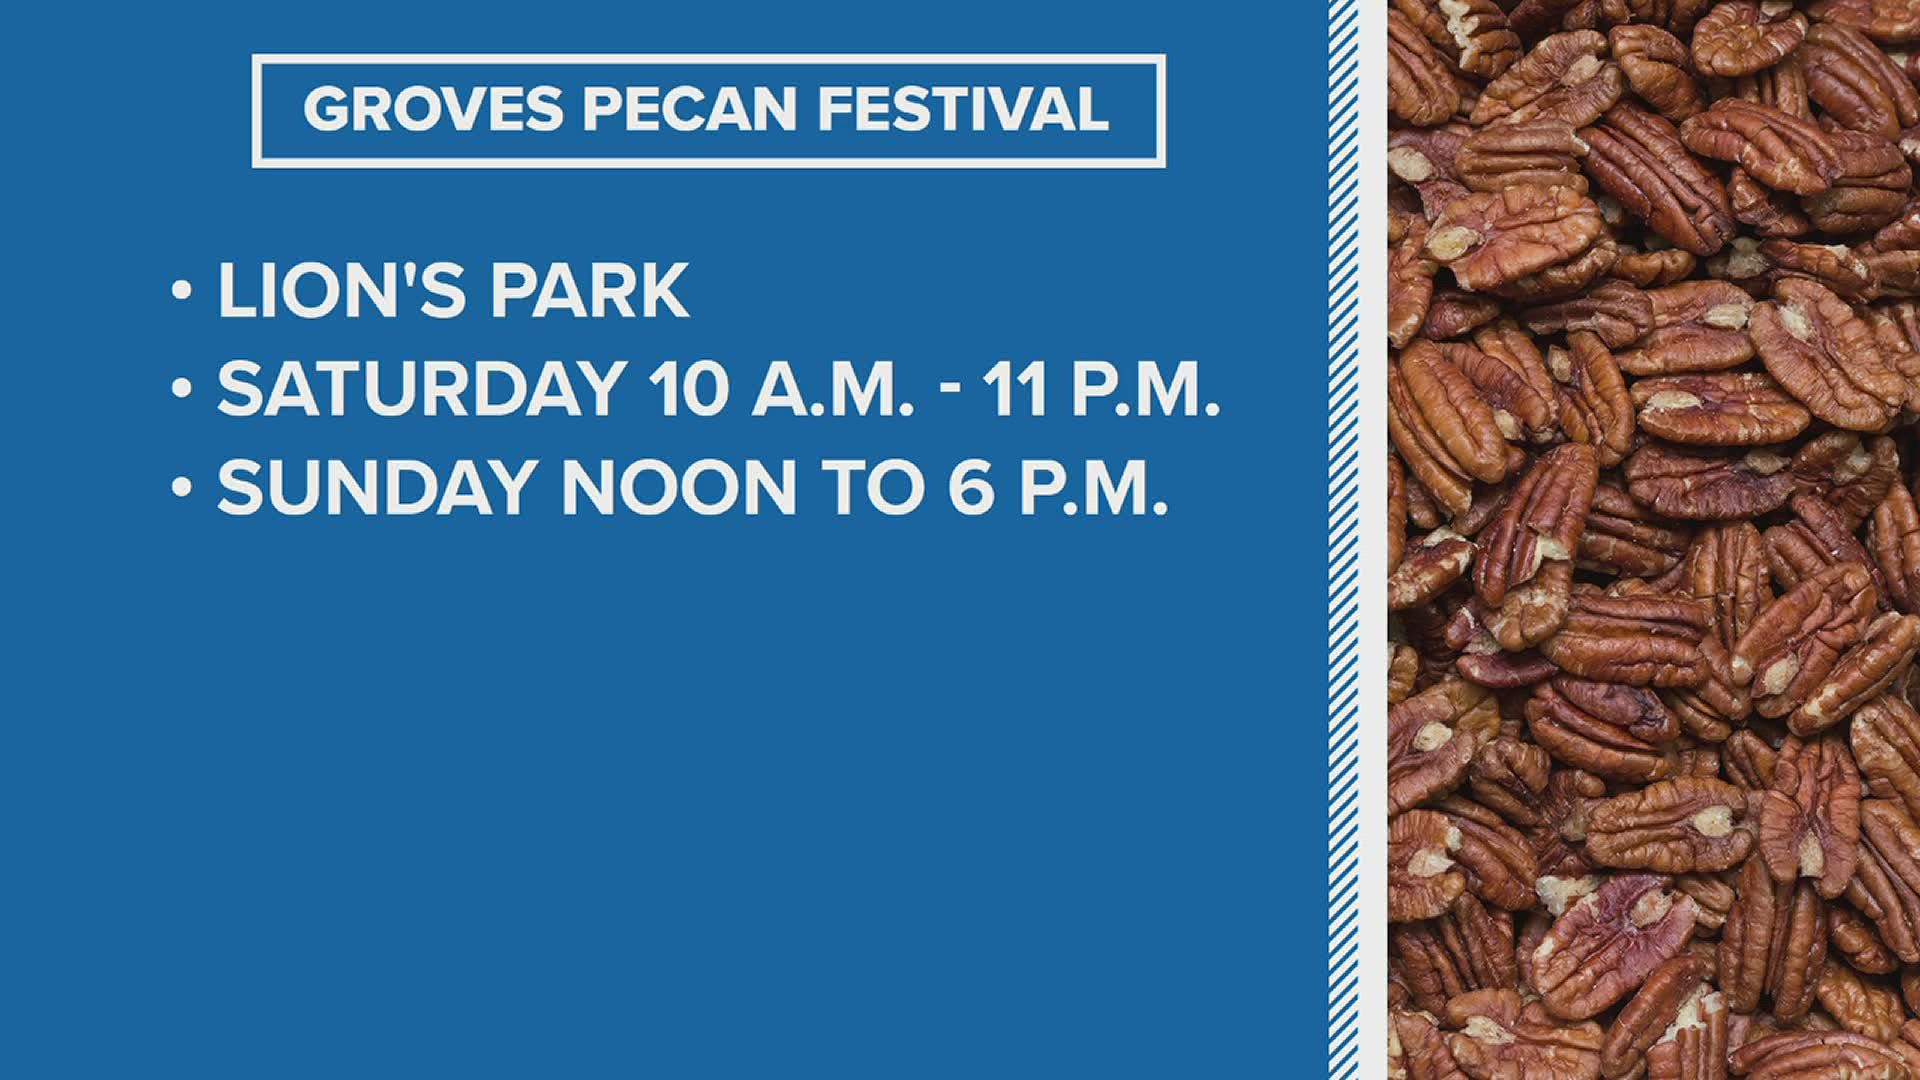 Festivities at the Groves Pecan Festival ran from 10 a.m. to 11 p.m. on Saturday.